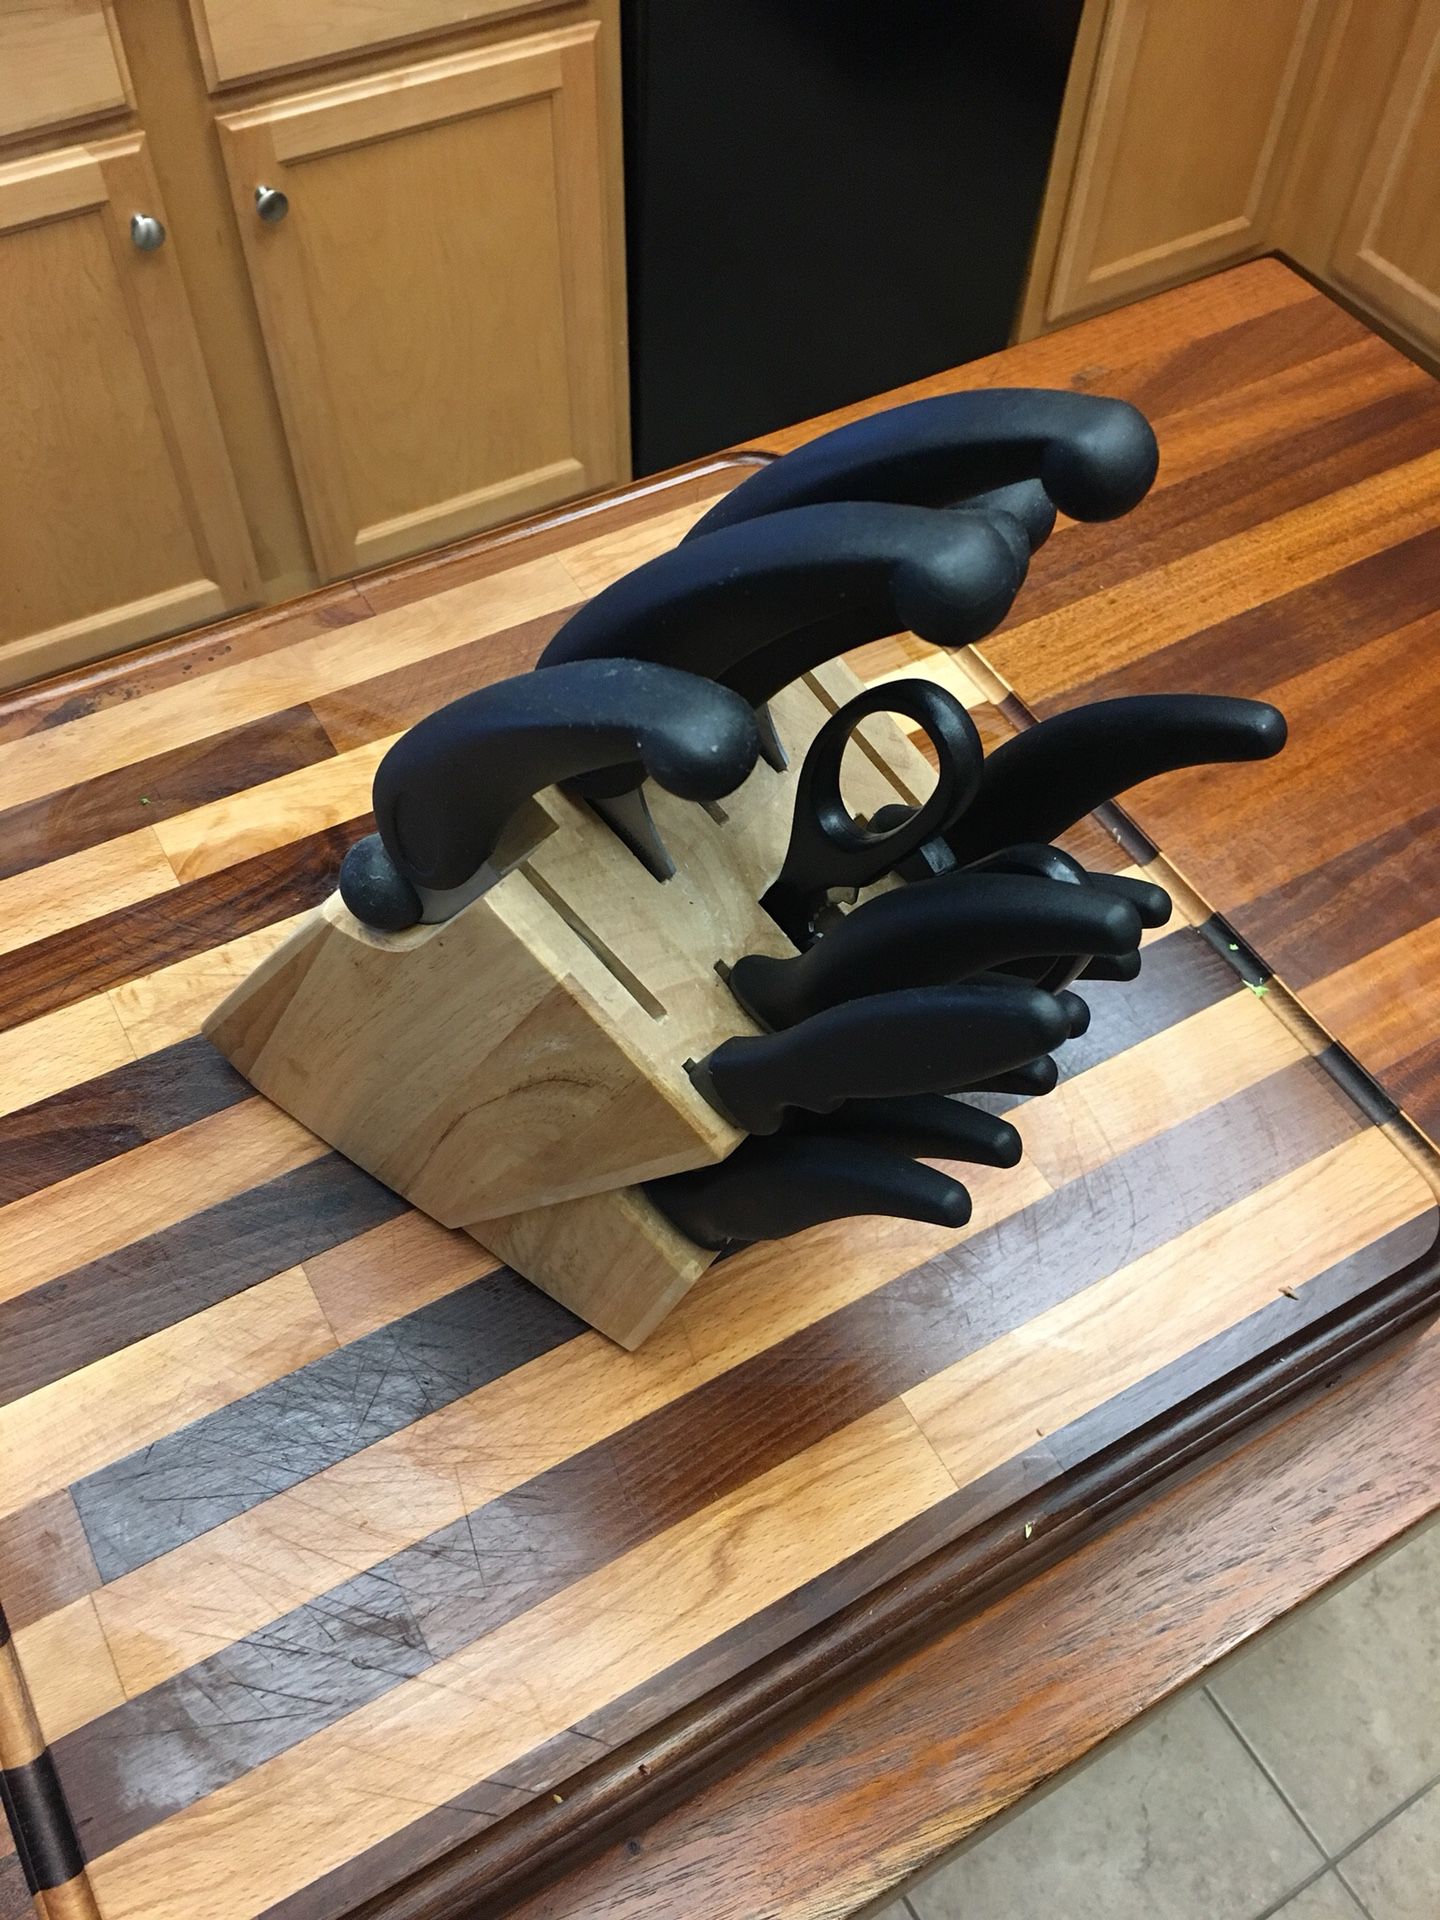 Wholesale Miracle Blade Knife Block Products at Factory Prices